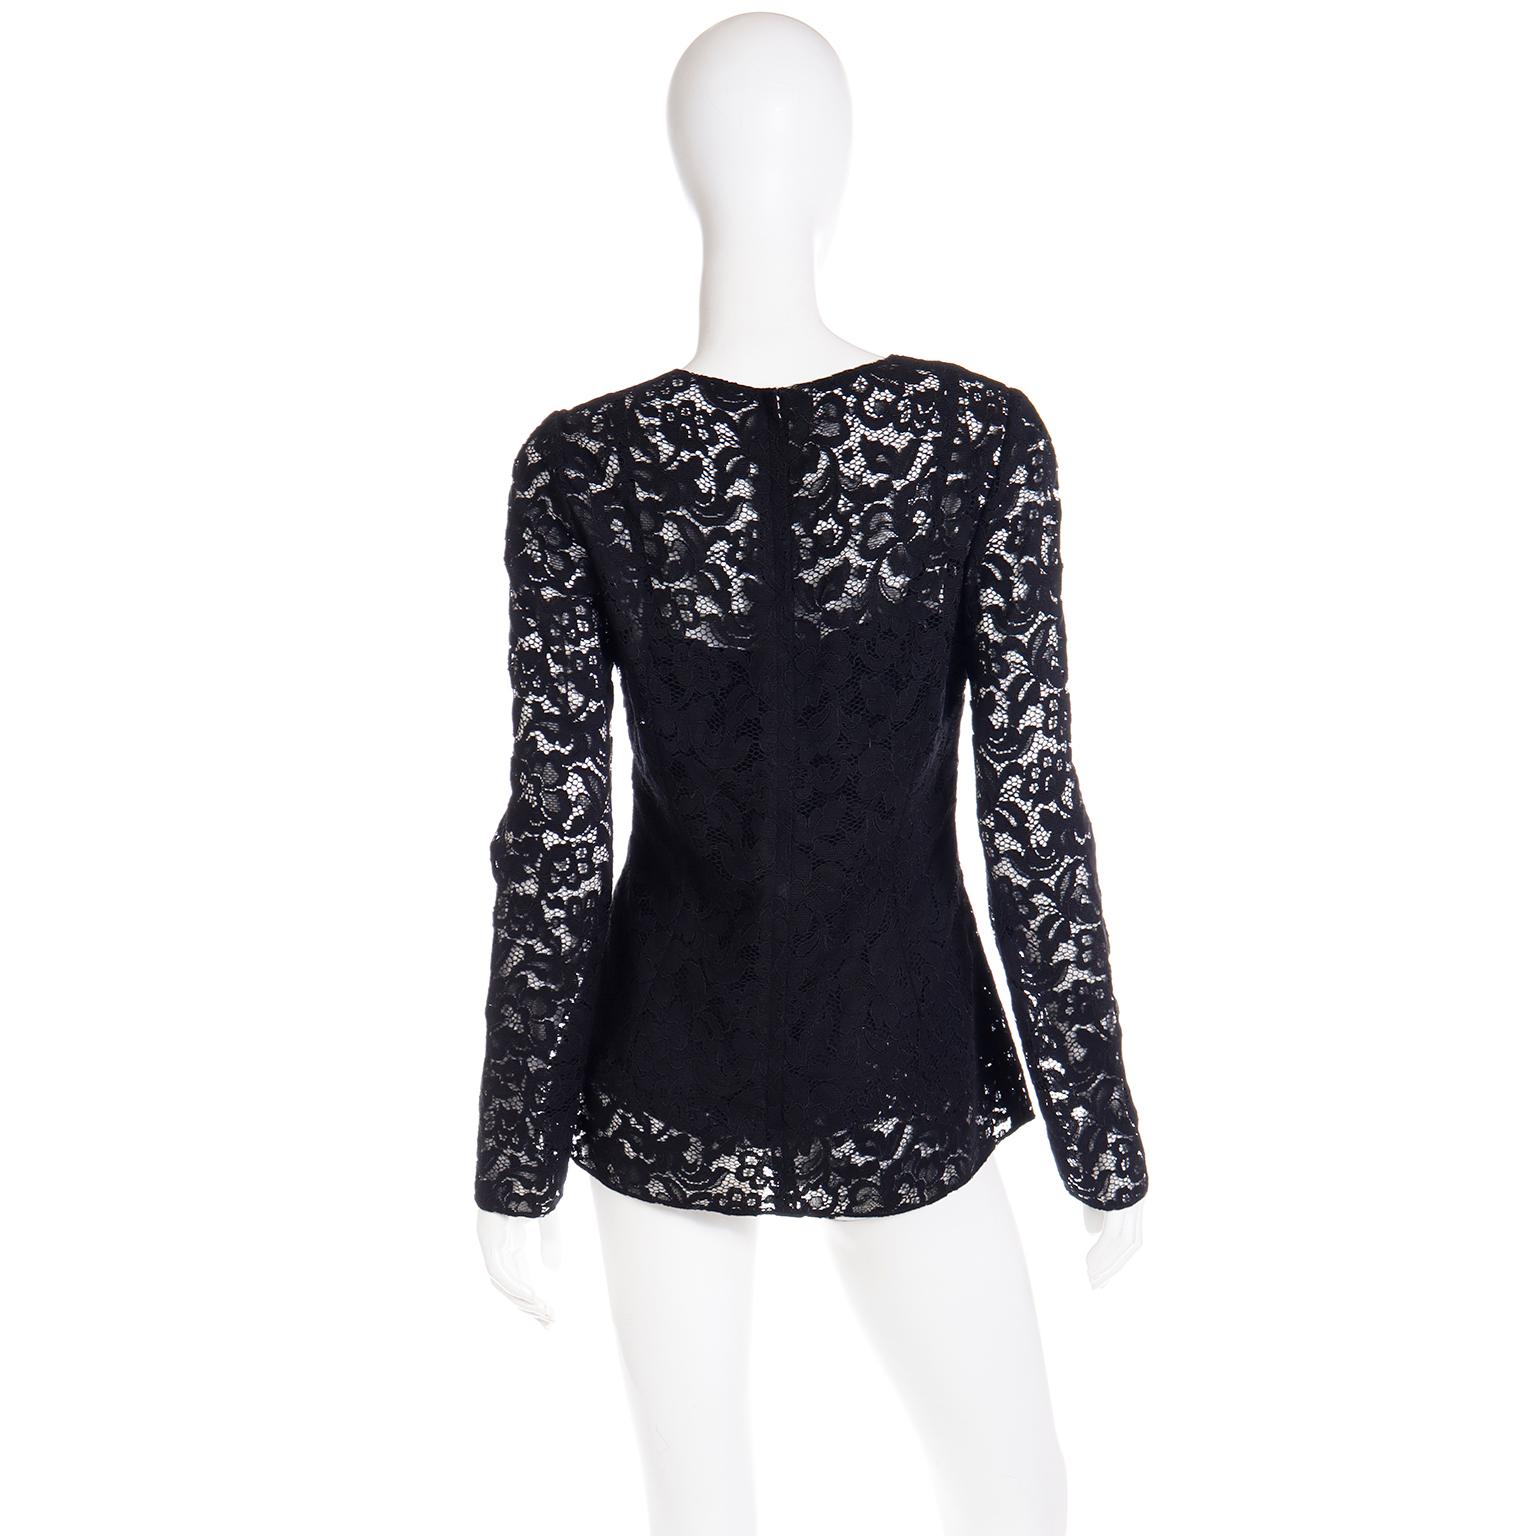 Dolce & Gabbana Black Lace Blouse Top With Long Sleeves & Built in Camisole In Excellent Condition For Sale In Portland, OR